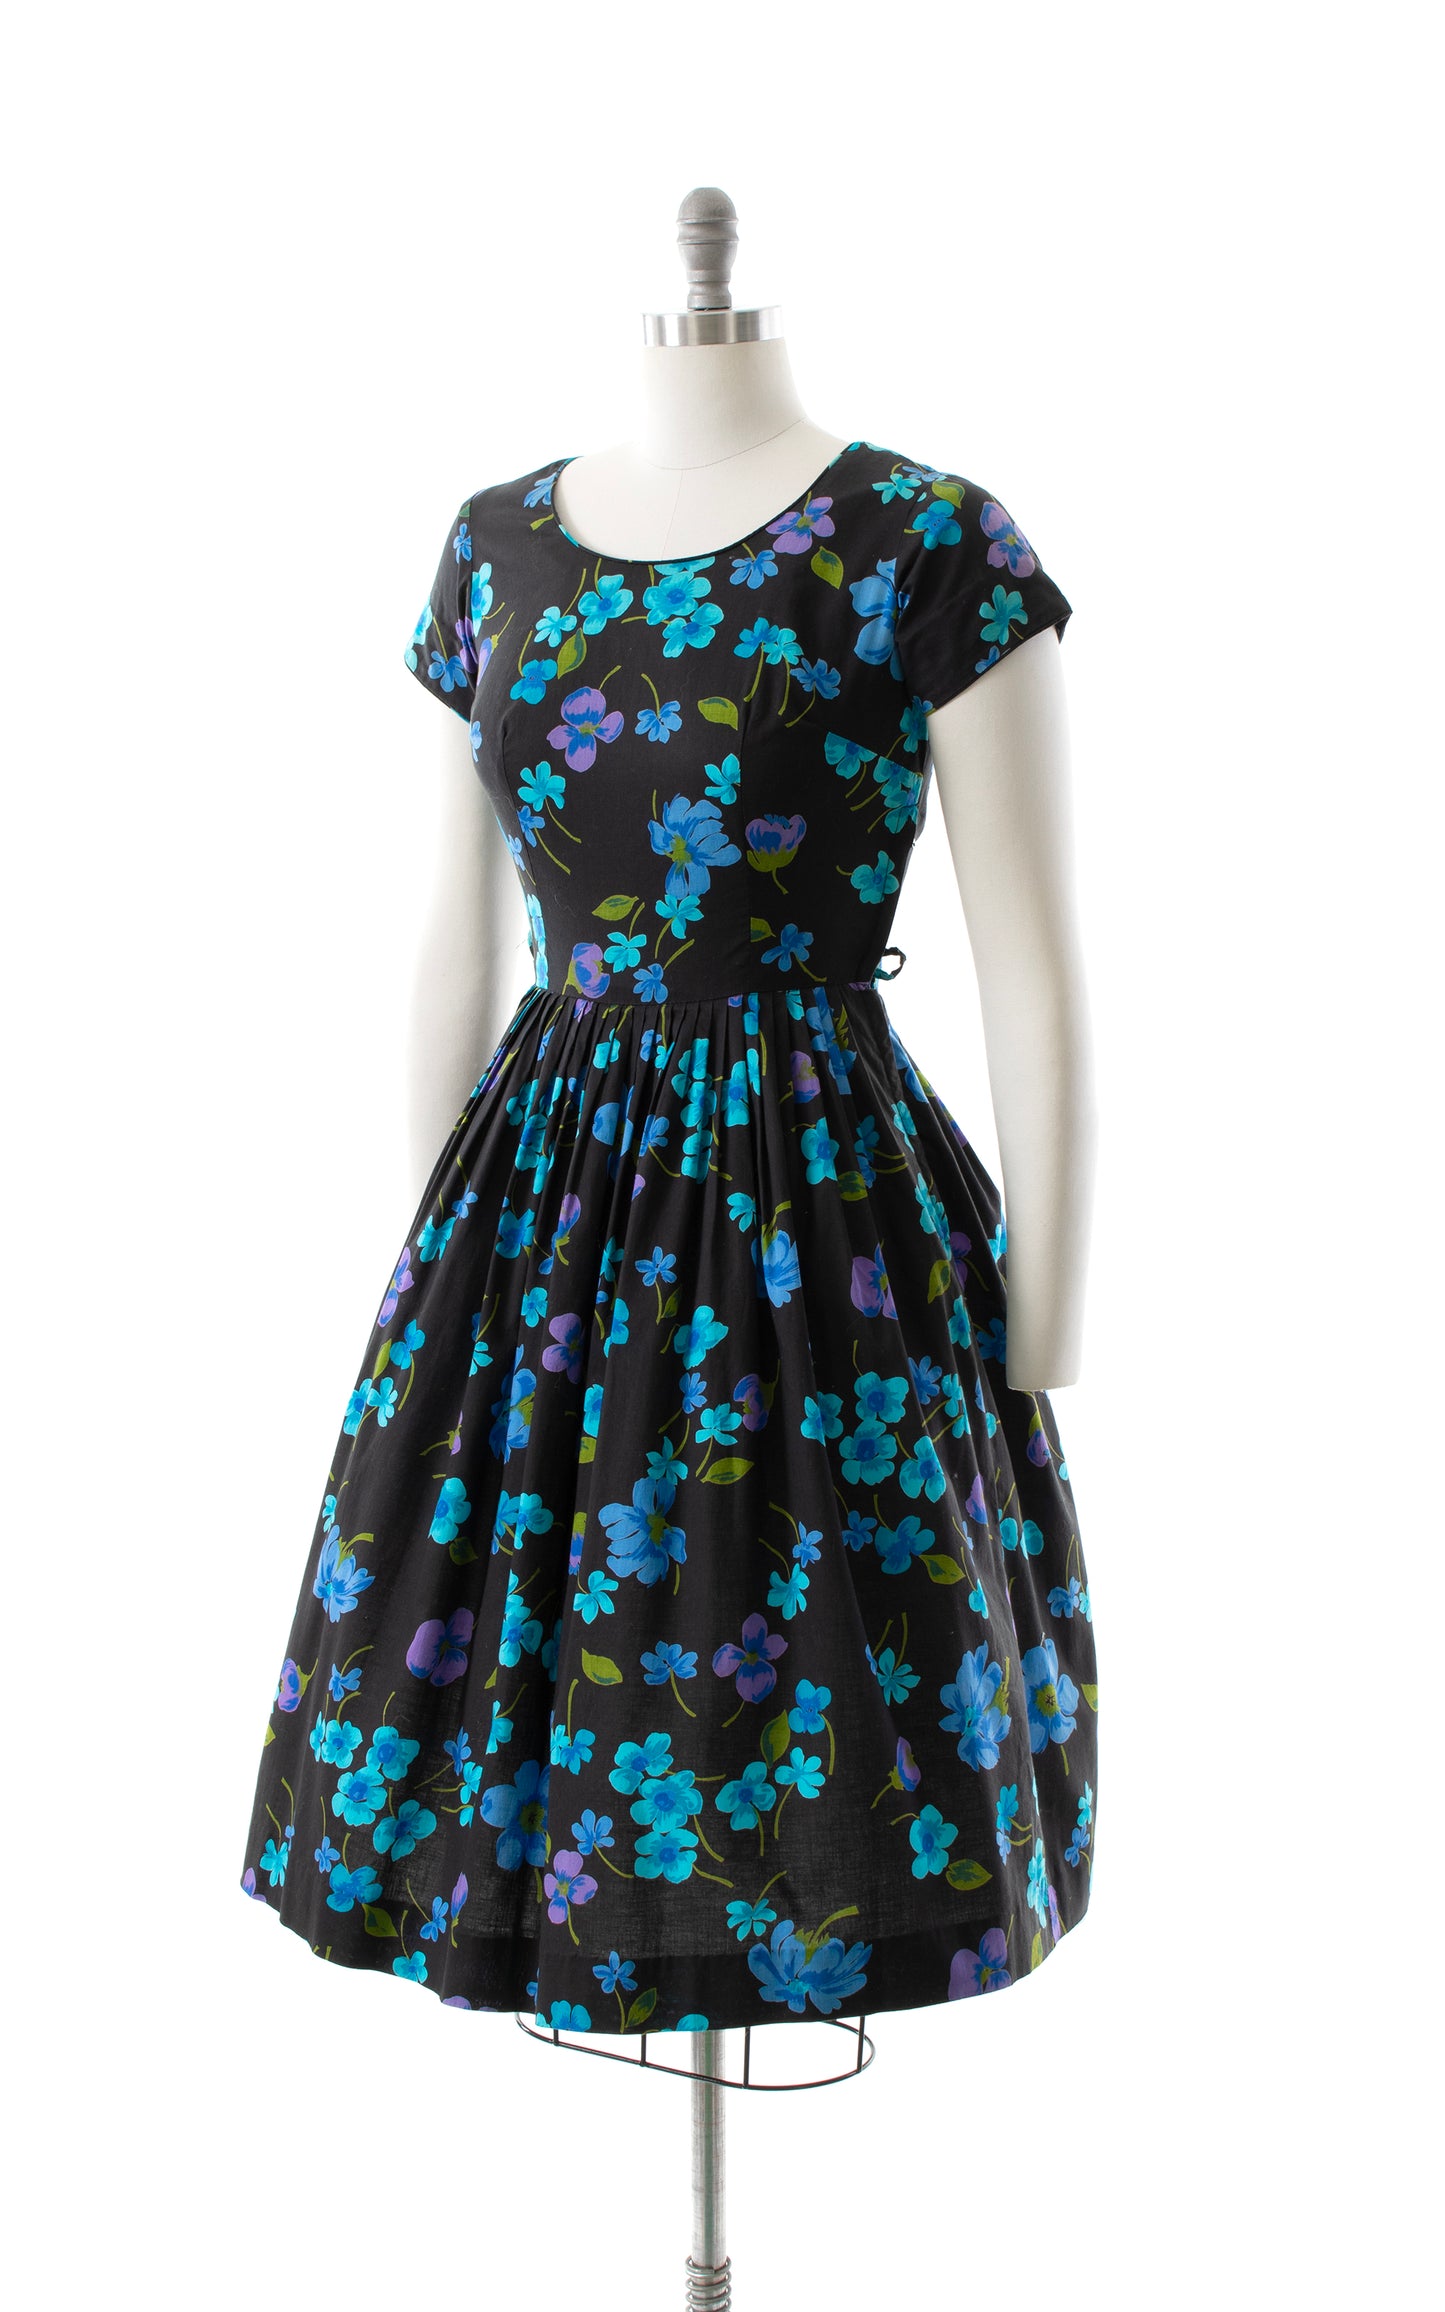 NEW ARRIVAL || 1950s Black Floral Cotton Dress | small